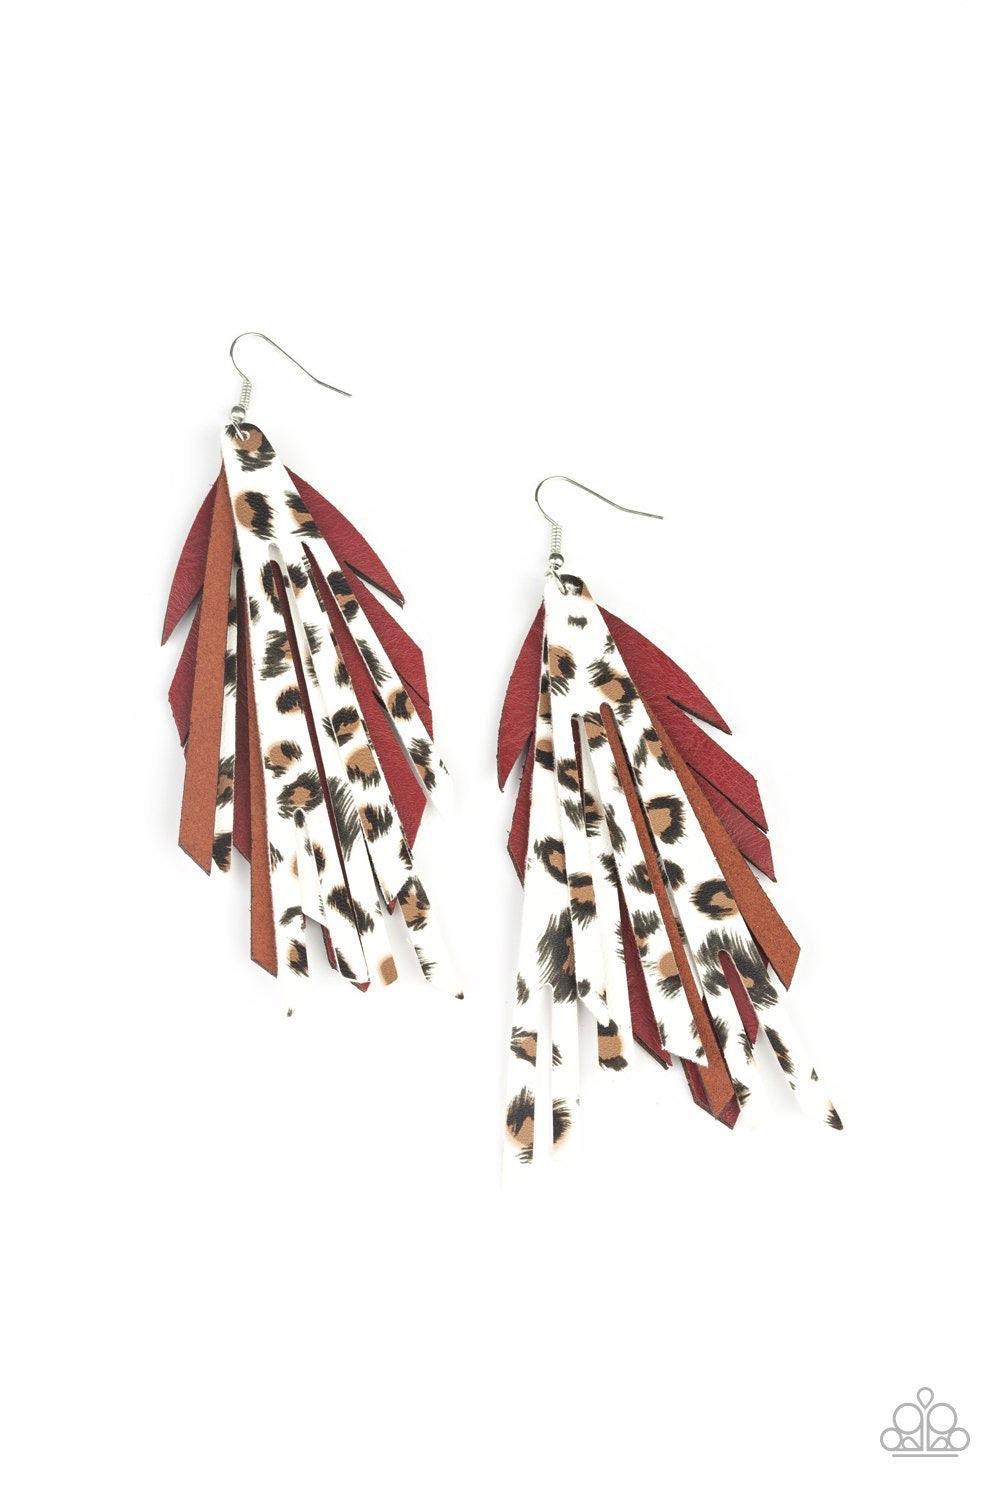 Paparazzi Accessories Untamable ~Red Strips of brown suede and cheetah patterned leather pieces layer atop a red leather feather backdrop, creating a wild fringe. Earring attaches to a standard fishhook fitting.Sold as one pair of earrings. Jewelry